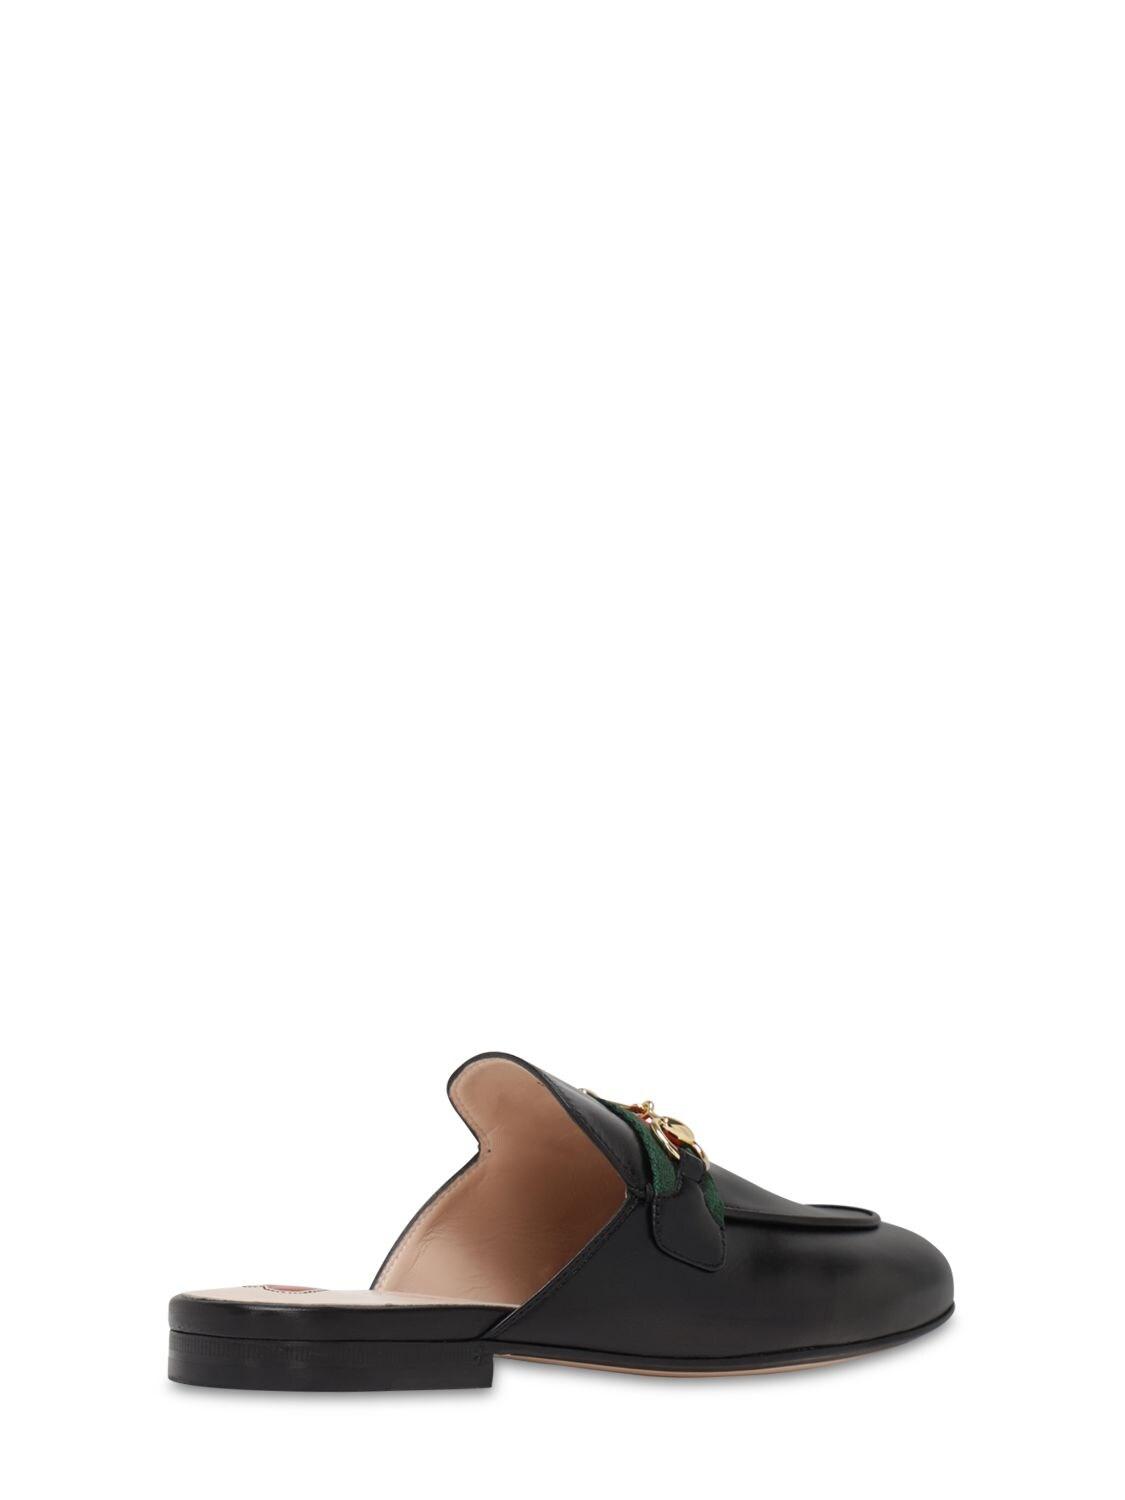 Gucci 10mm Princetown Leather Mules in Black - Lyst